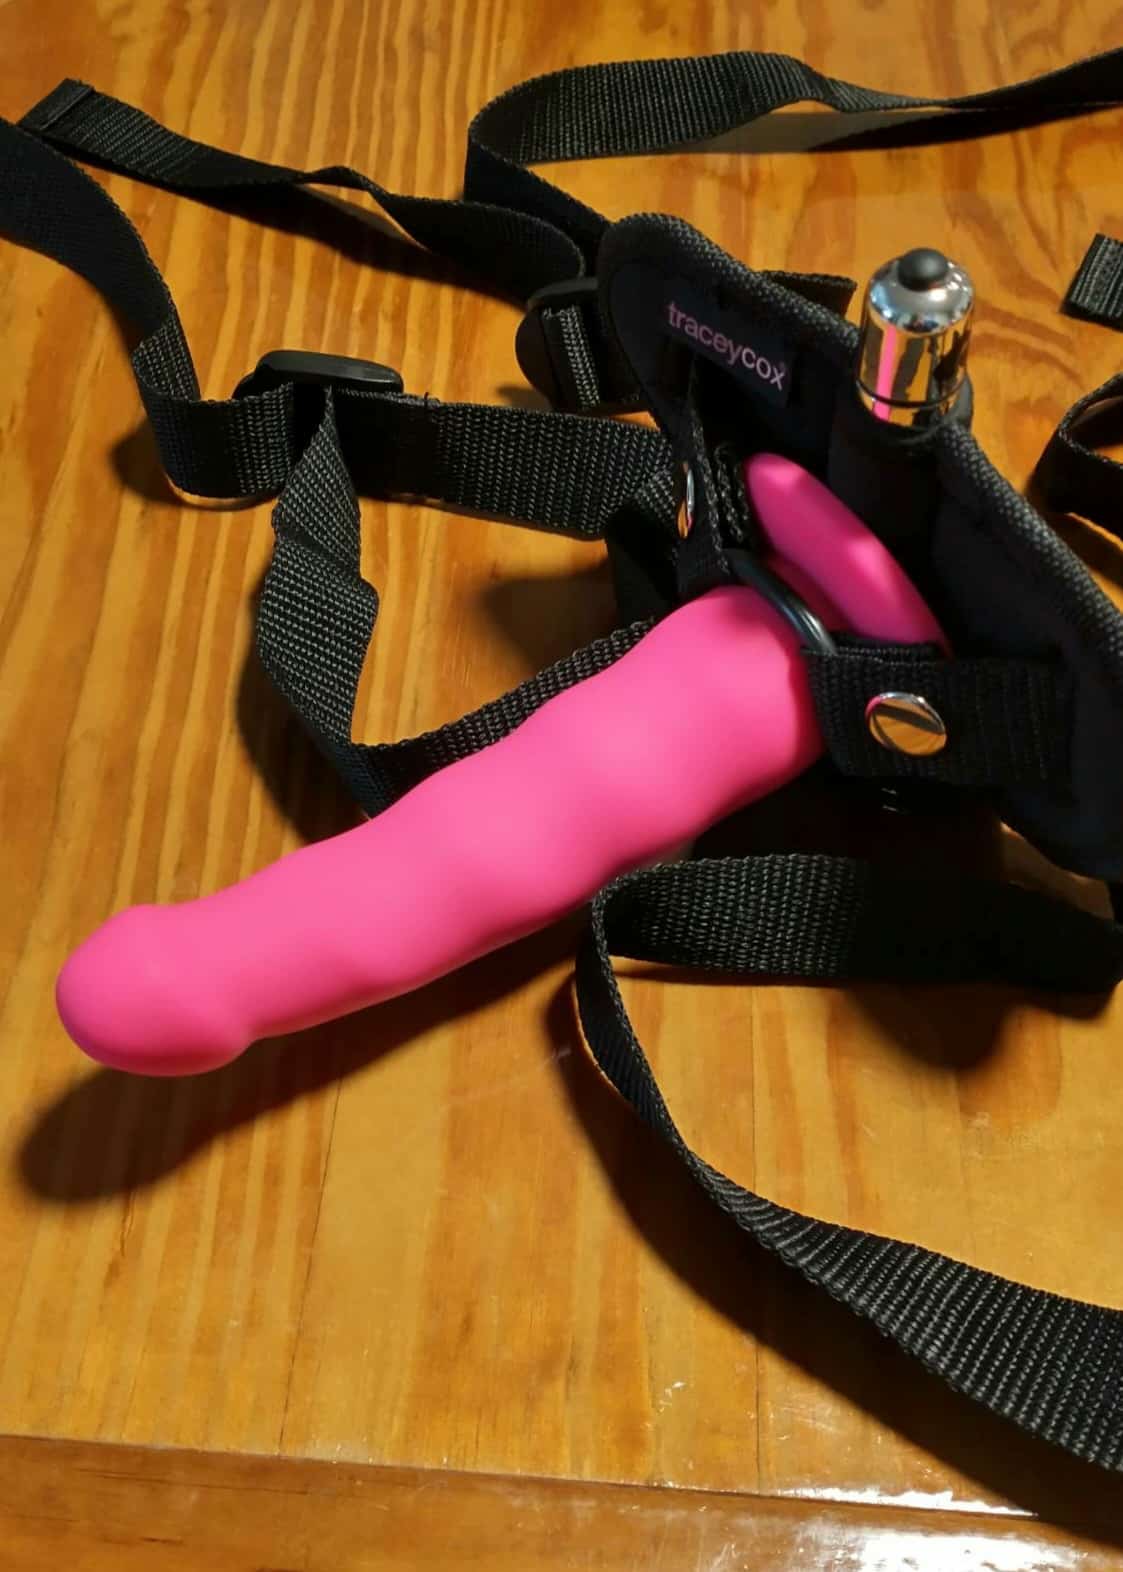 Tracey Cox Supersex Strap-On Dildos. Slide 9